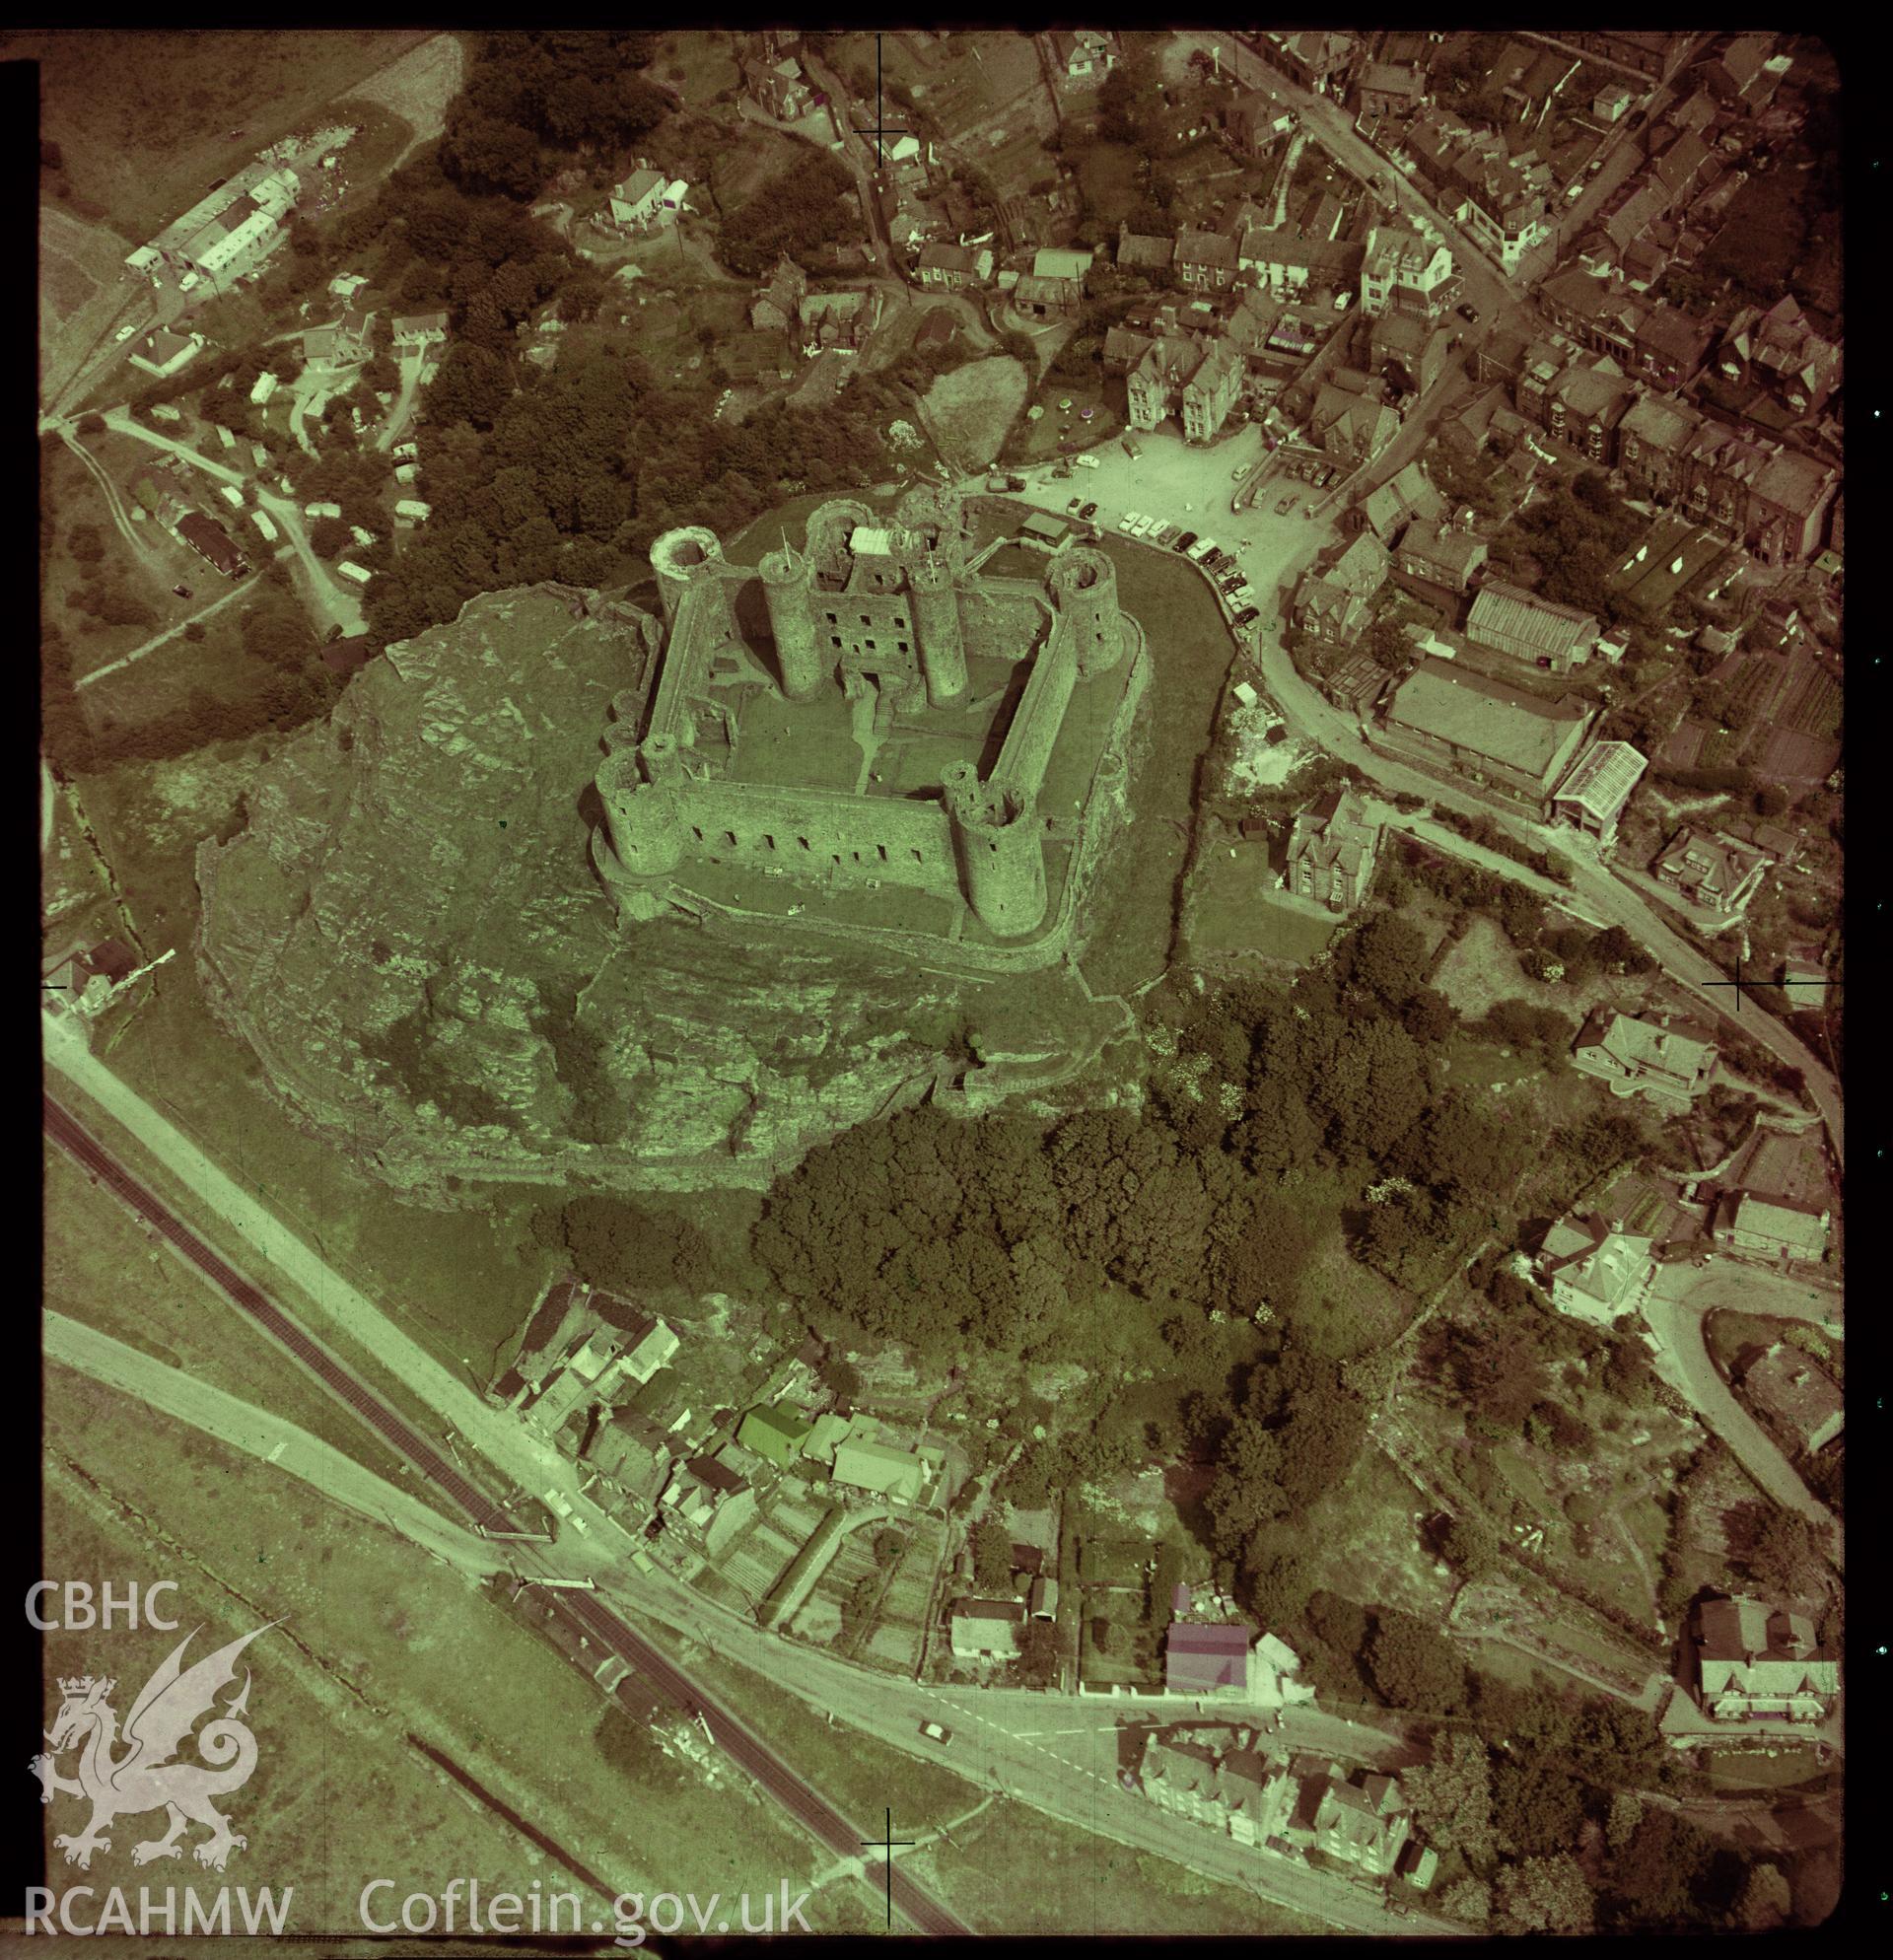 Digital copy of a colour negative showing view of Harlech Castle dated 1962.